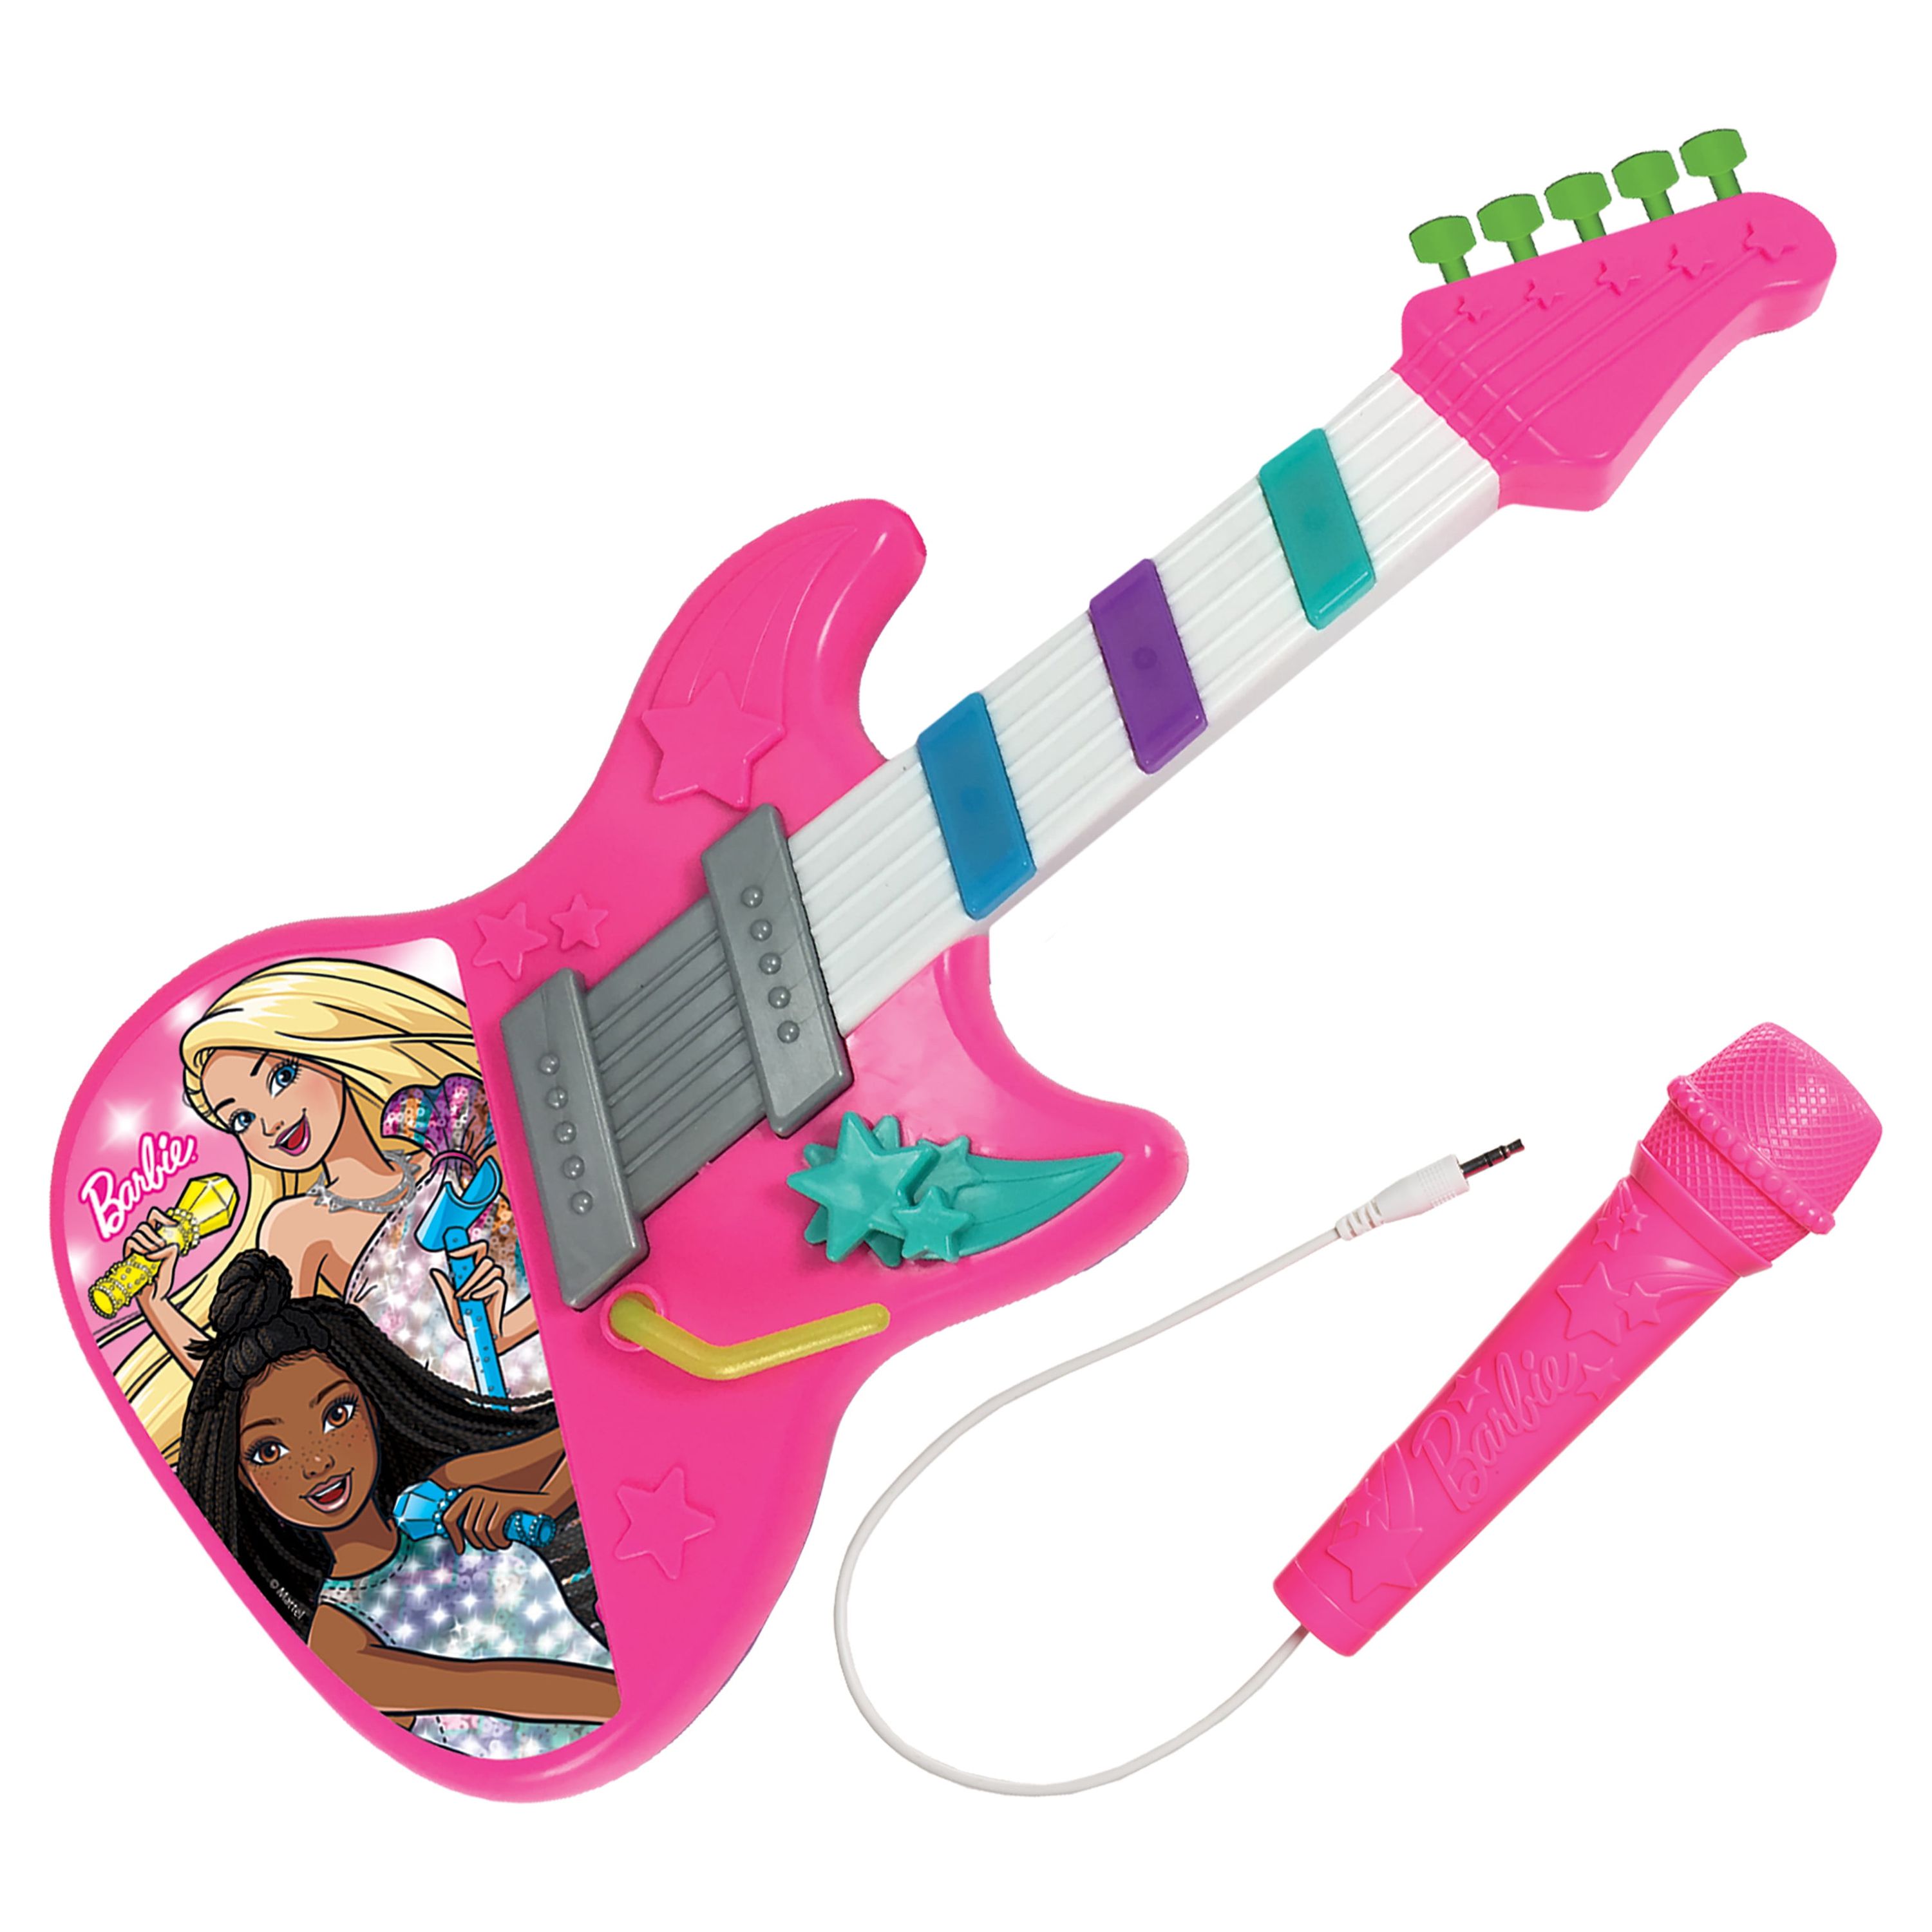 Barbie Rock Star Guitar, Interactive Electronic Toy Guitar with Lights, Sounds, and Microphone,  Kids Toys for Ages 3 Up, Gifts and Presents - image 4 of 11